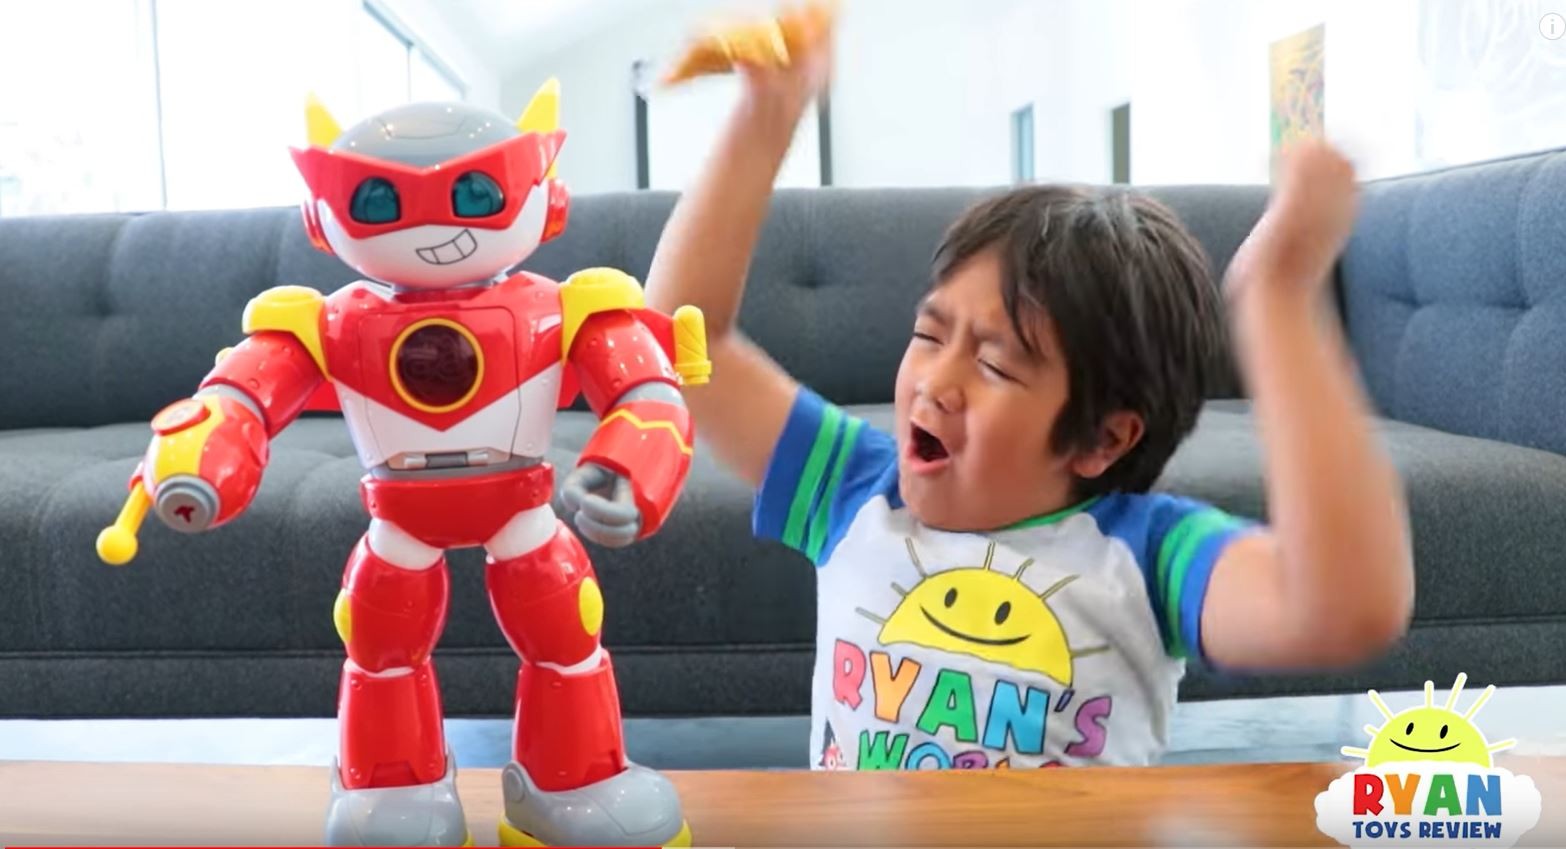 ryan's toy review forbes